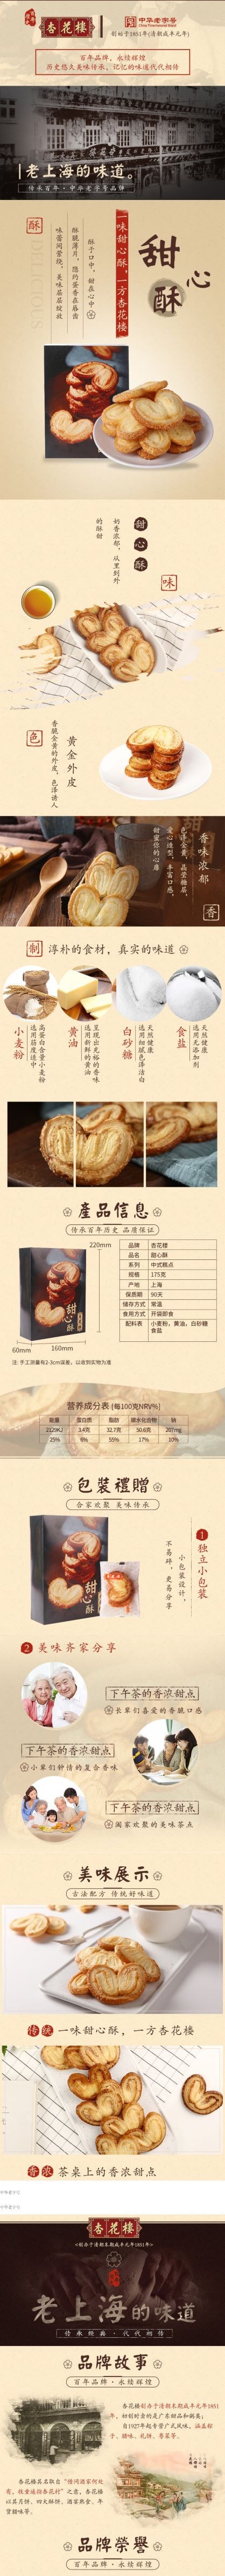 XINHUALOU Boxed Snacks Pastry Sweetheart 175g